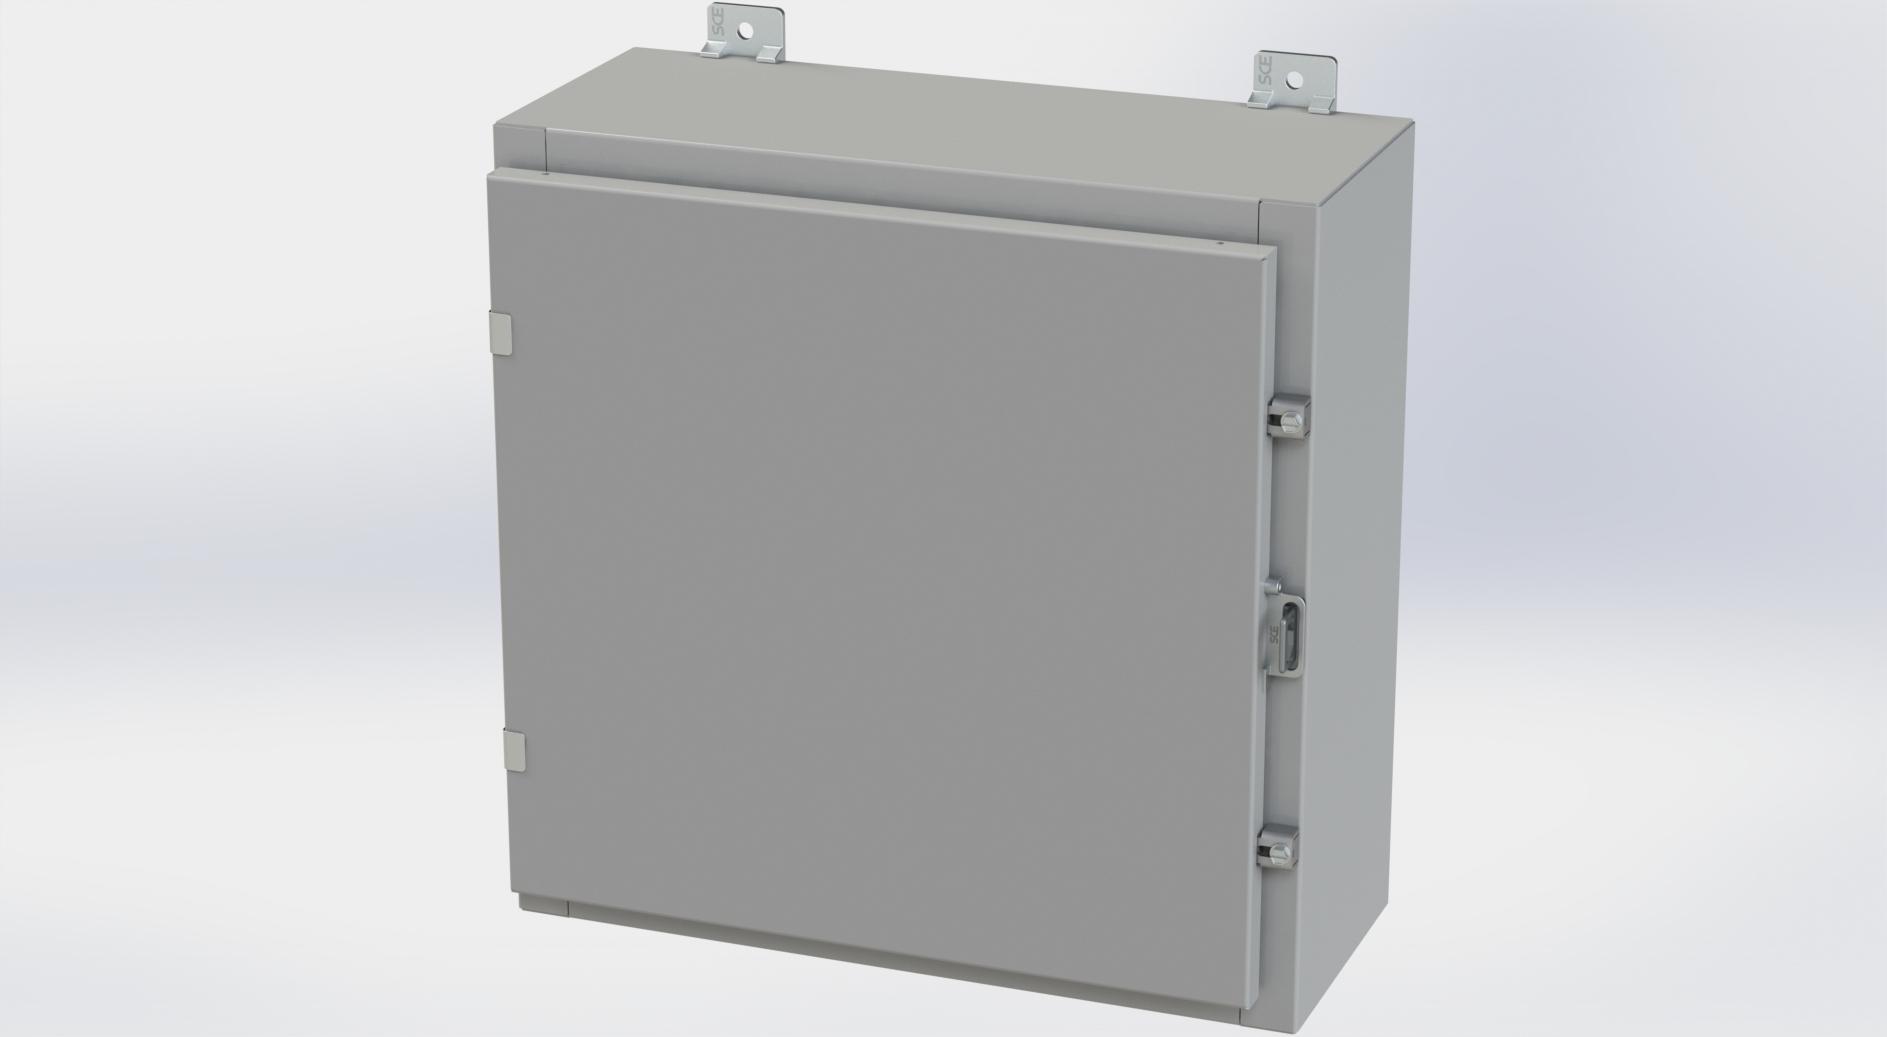 Saginaw Control SCE-20H2008LP Nema 4 LP Enclosure, Height:20.00", Width:20.00", Depth:8.00", ANSI-61 gray powder coating inside and out. Optional panels are powder coated white.